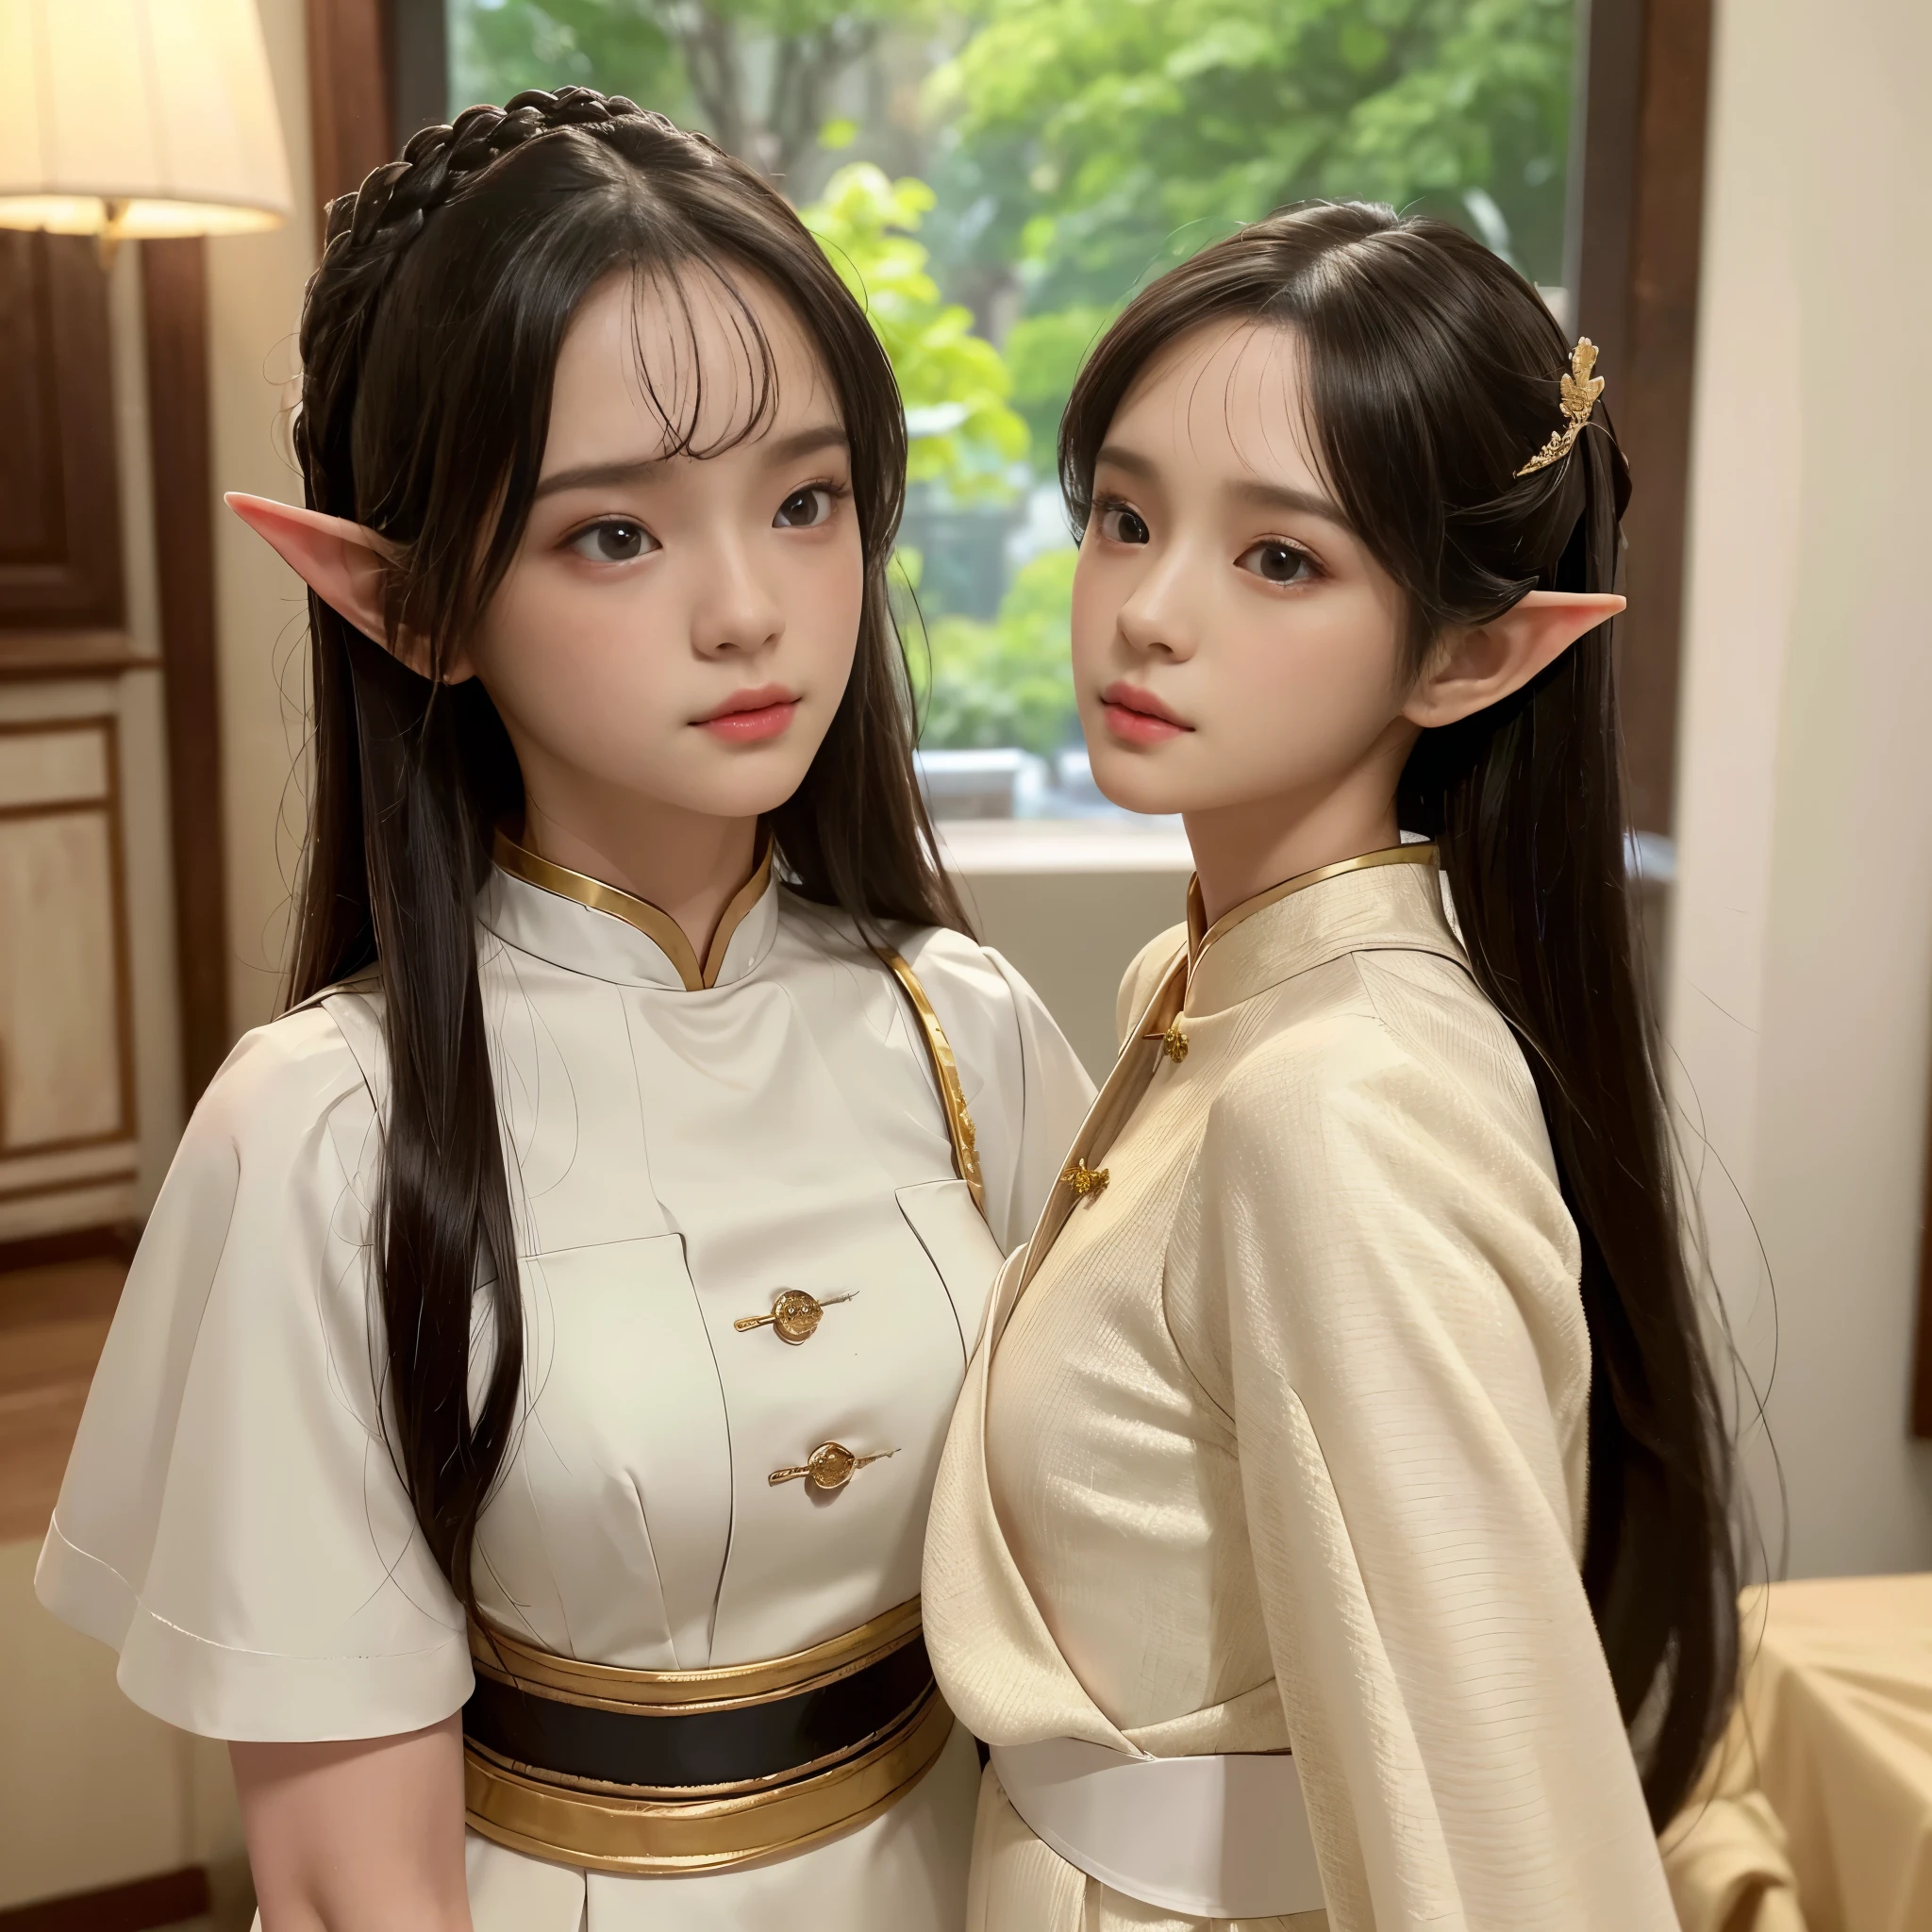 Elf, tidy traditional Thai dress Suits
(Masterpiece: 1.3), (8K, Photorealistic, High-Quality: 1.4), Elf, (Cherprang BNK face), (Noble hairstyle), Realistic Elfin eyes, Detailed Elfin features, High resolution, Ultra-realistic, High detailing, Golden ratio, (Detailed Face: 1.2), (Enthralling to behold), (Masterpiece), (Best Quality), (Ultra-detailed, Finely detailed), High resolution, Composition of the whole body, High collar formal suits, Natural Color Lip, (Photorealistic, Realistic, Independent